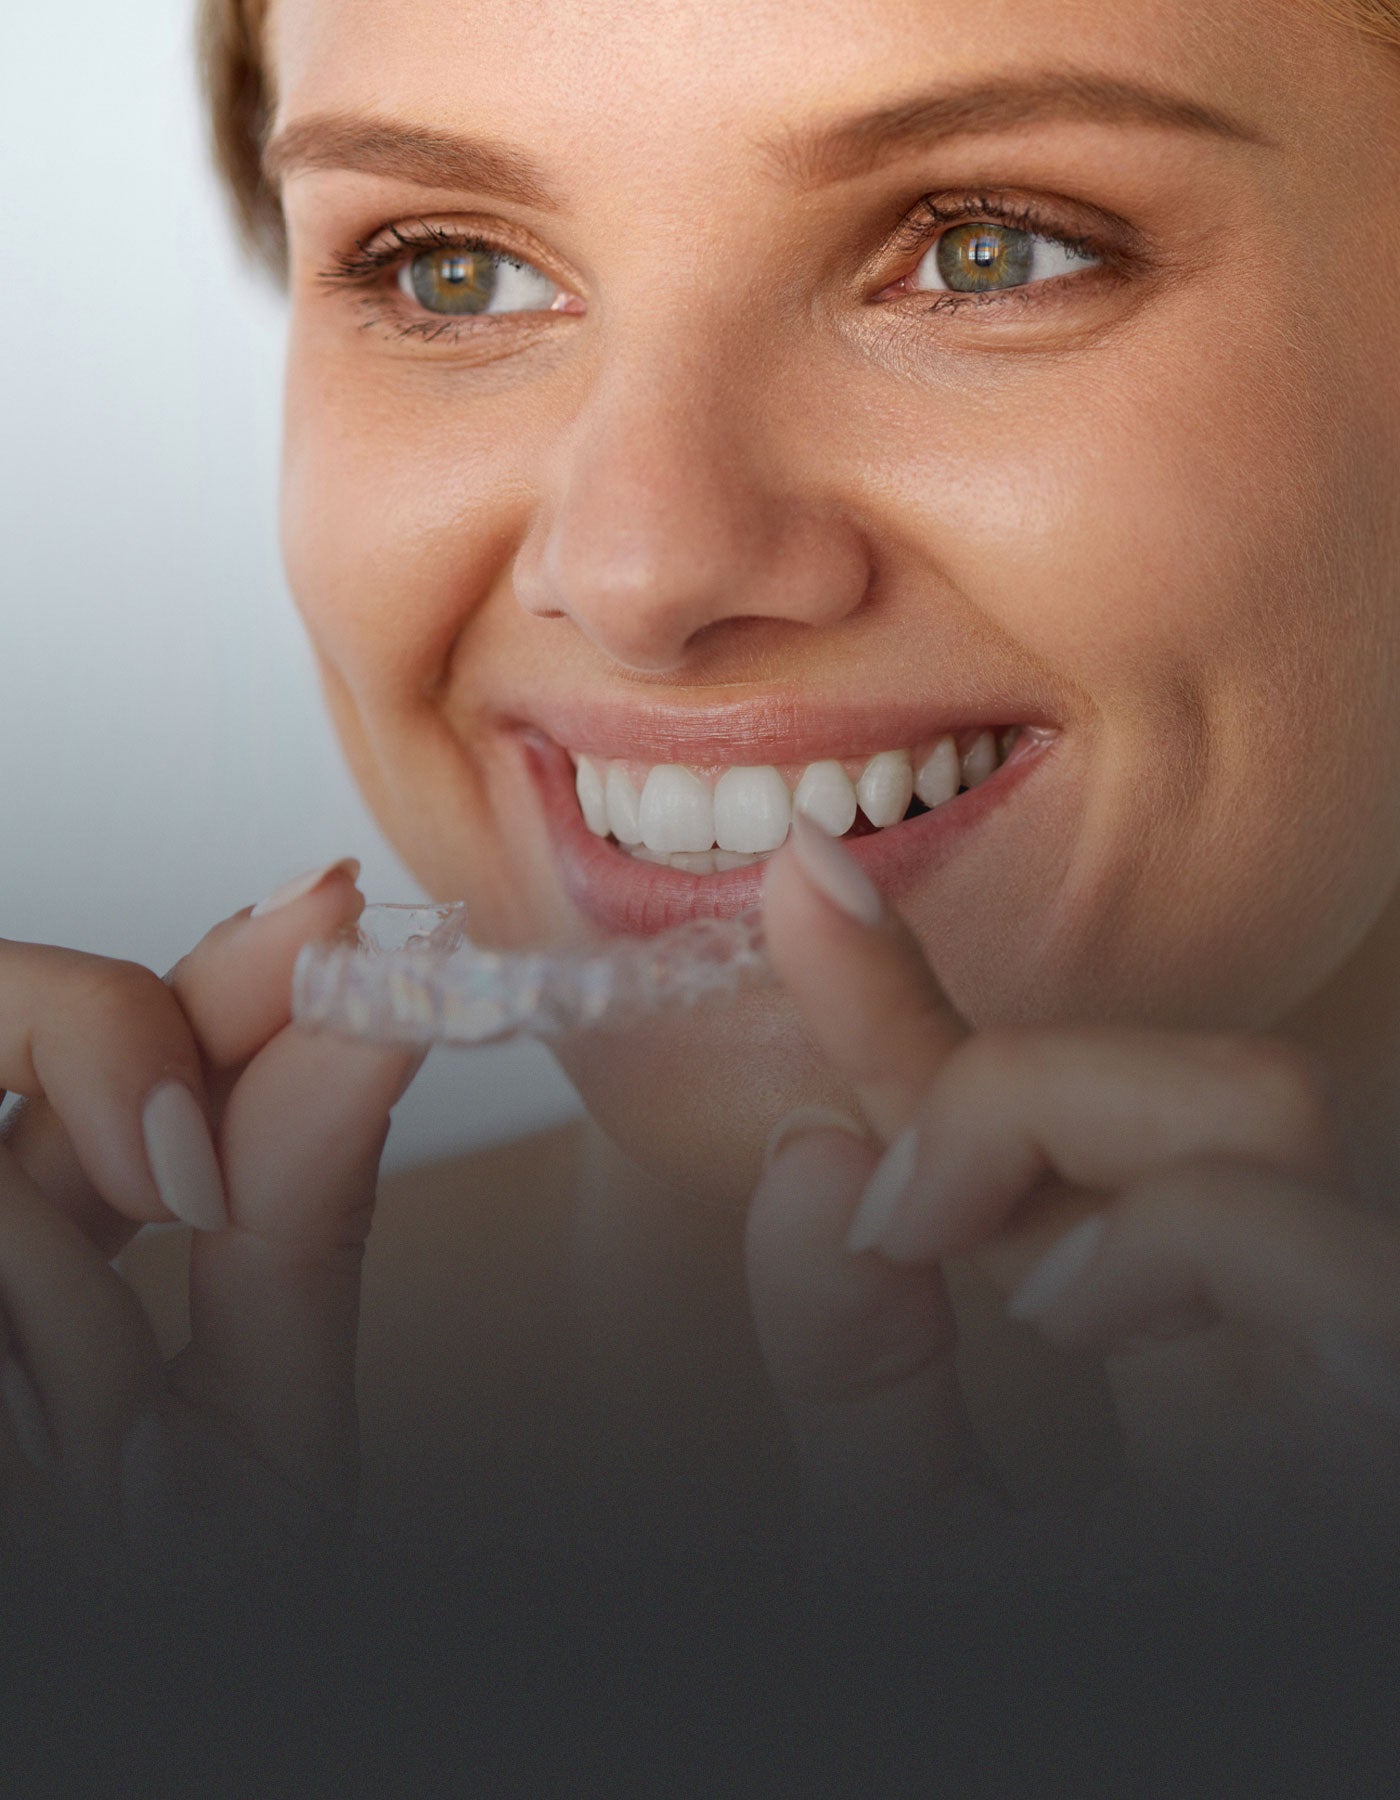 Patient holding orthodontic aligners for straight teeth